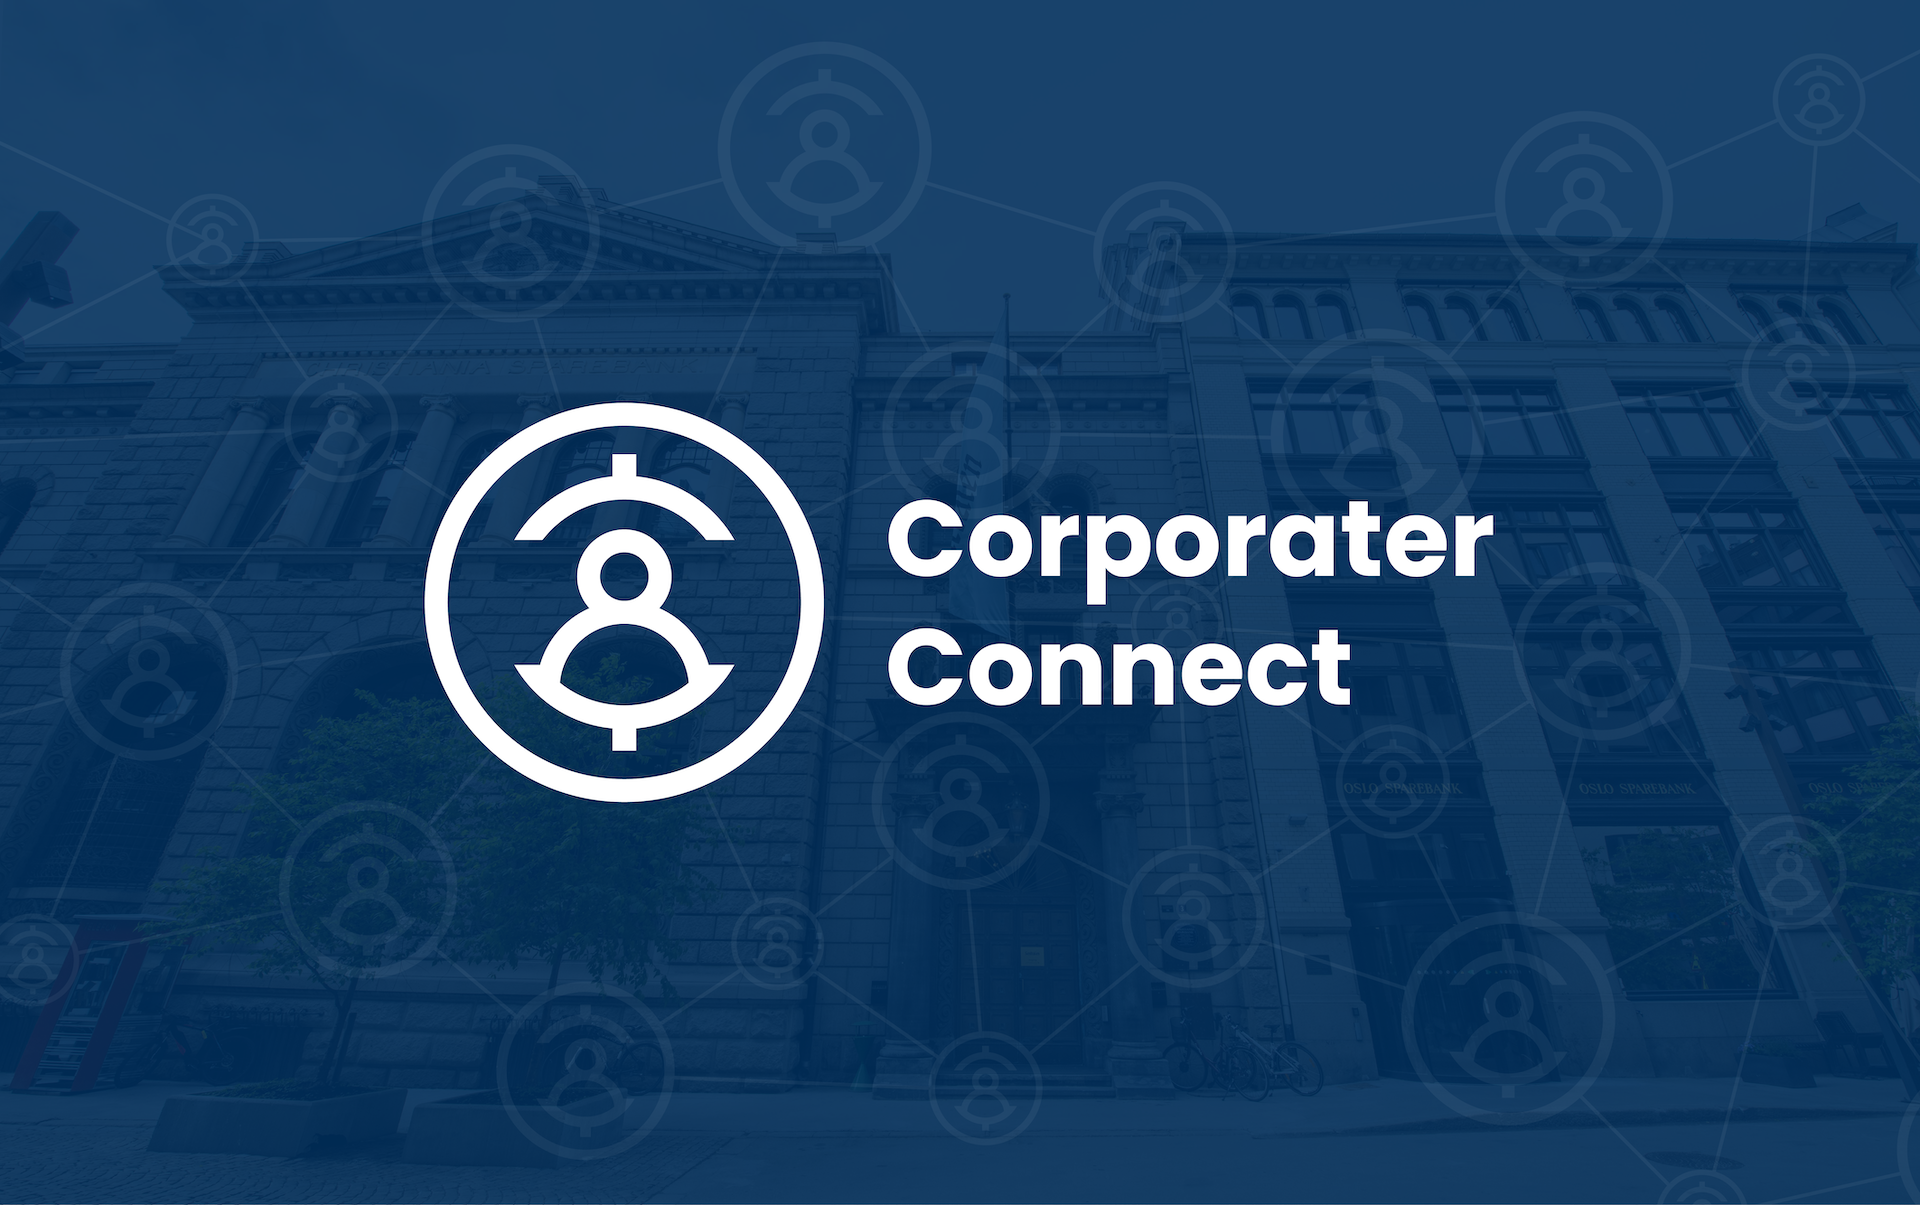 Corporater Connect